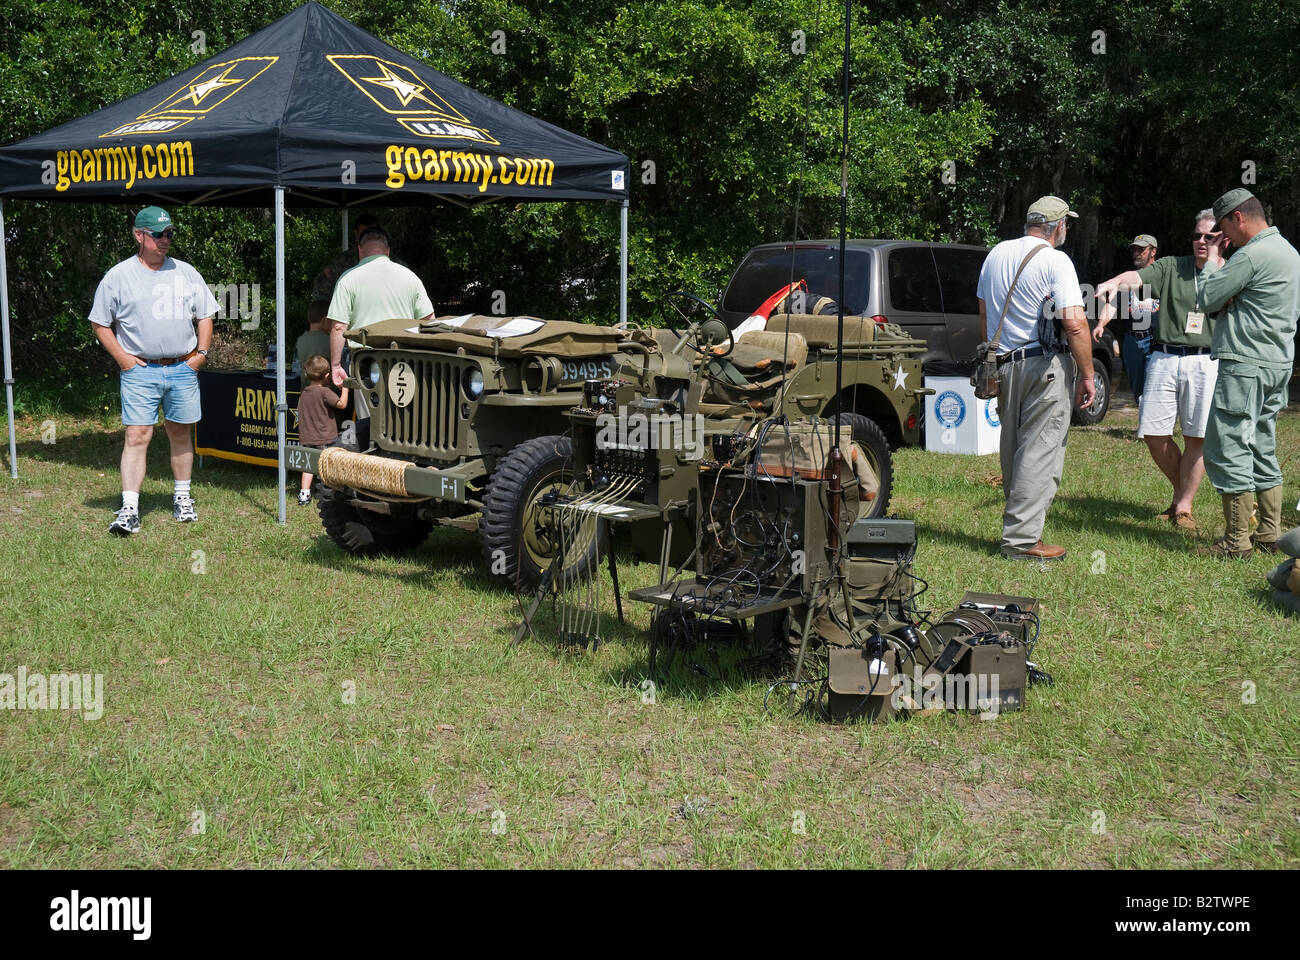 display of vintage U S Army equipment at fair Gainesville Florida Stock Photo